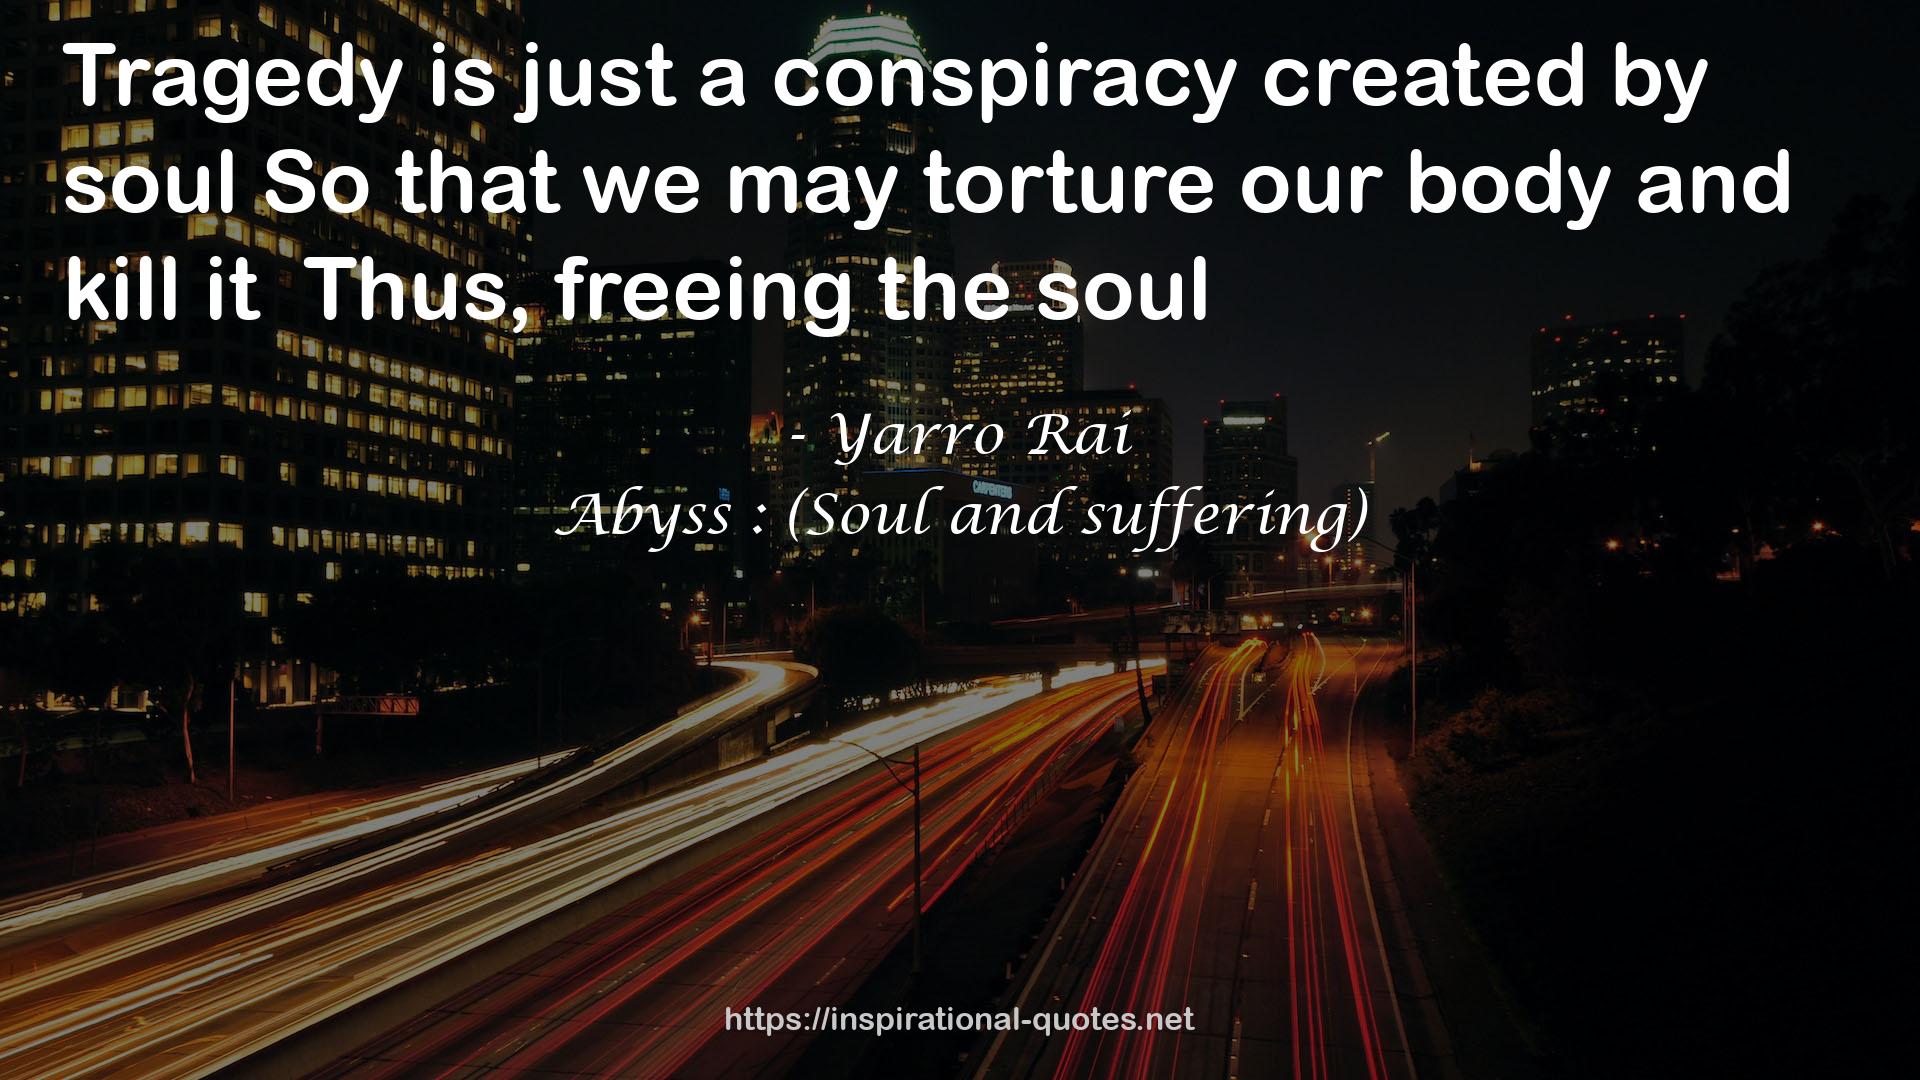 Abyss : (Soul and suffering) QUOTES